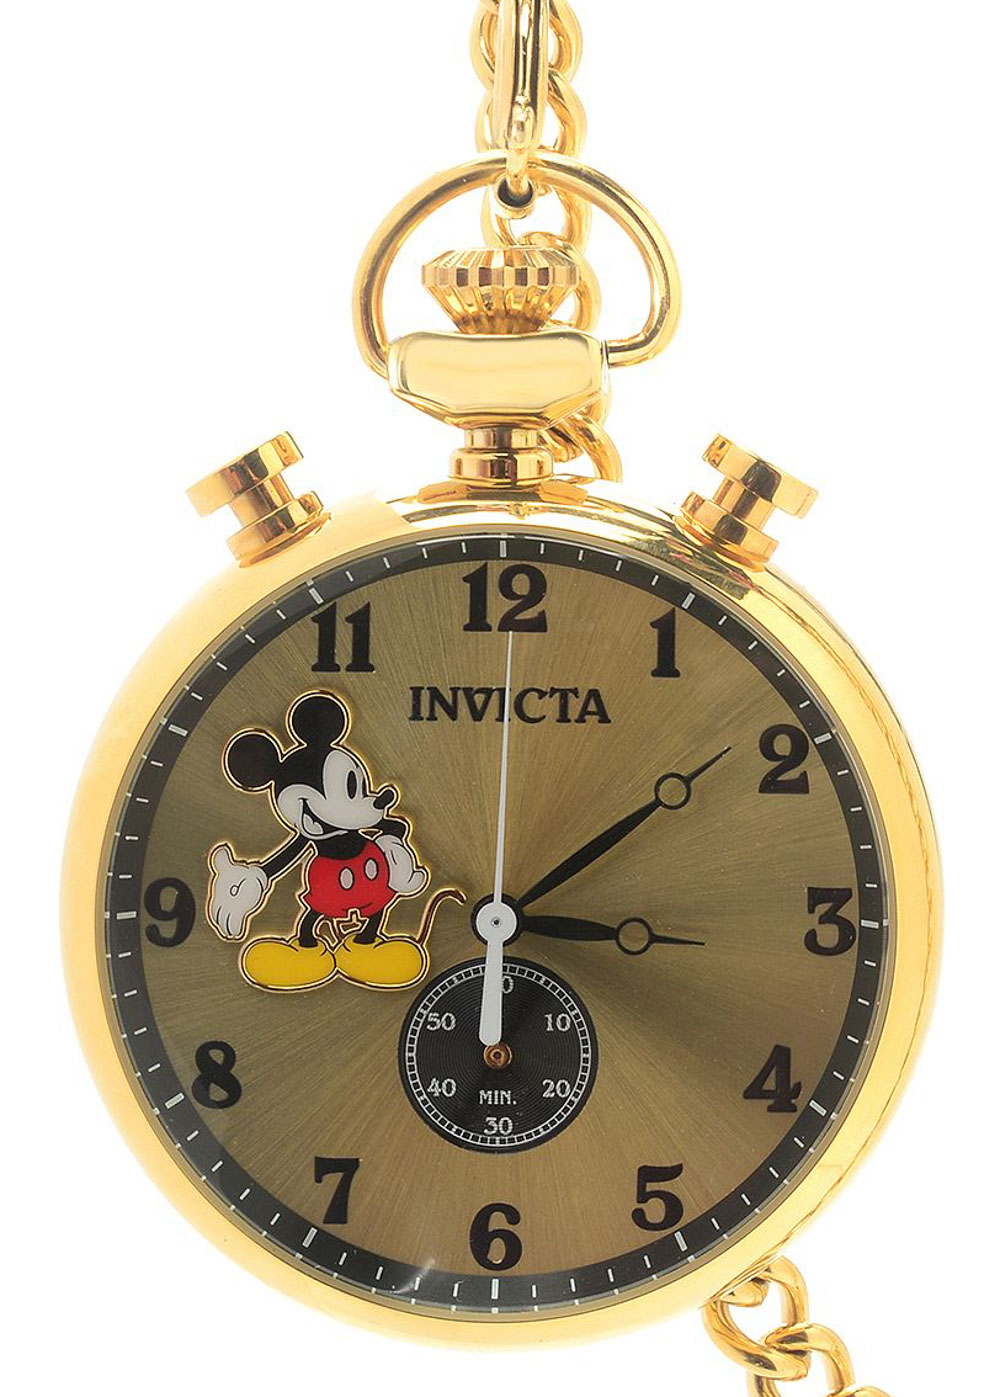 Invicta-Disney-limited-edition-watches-18